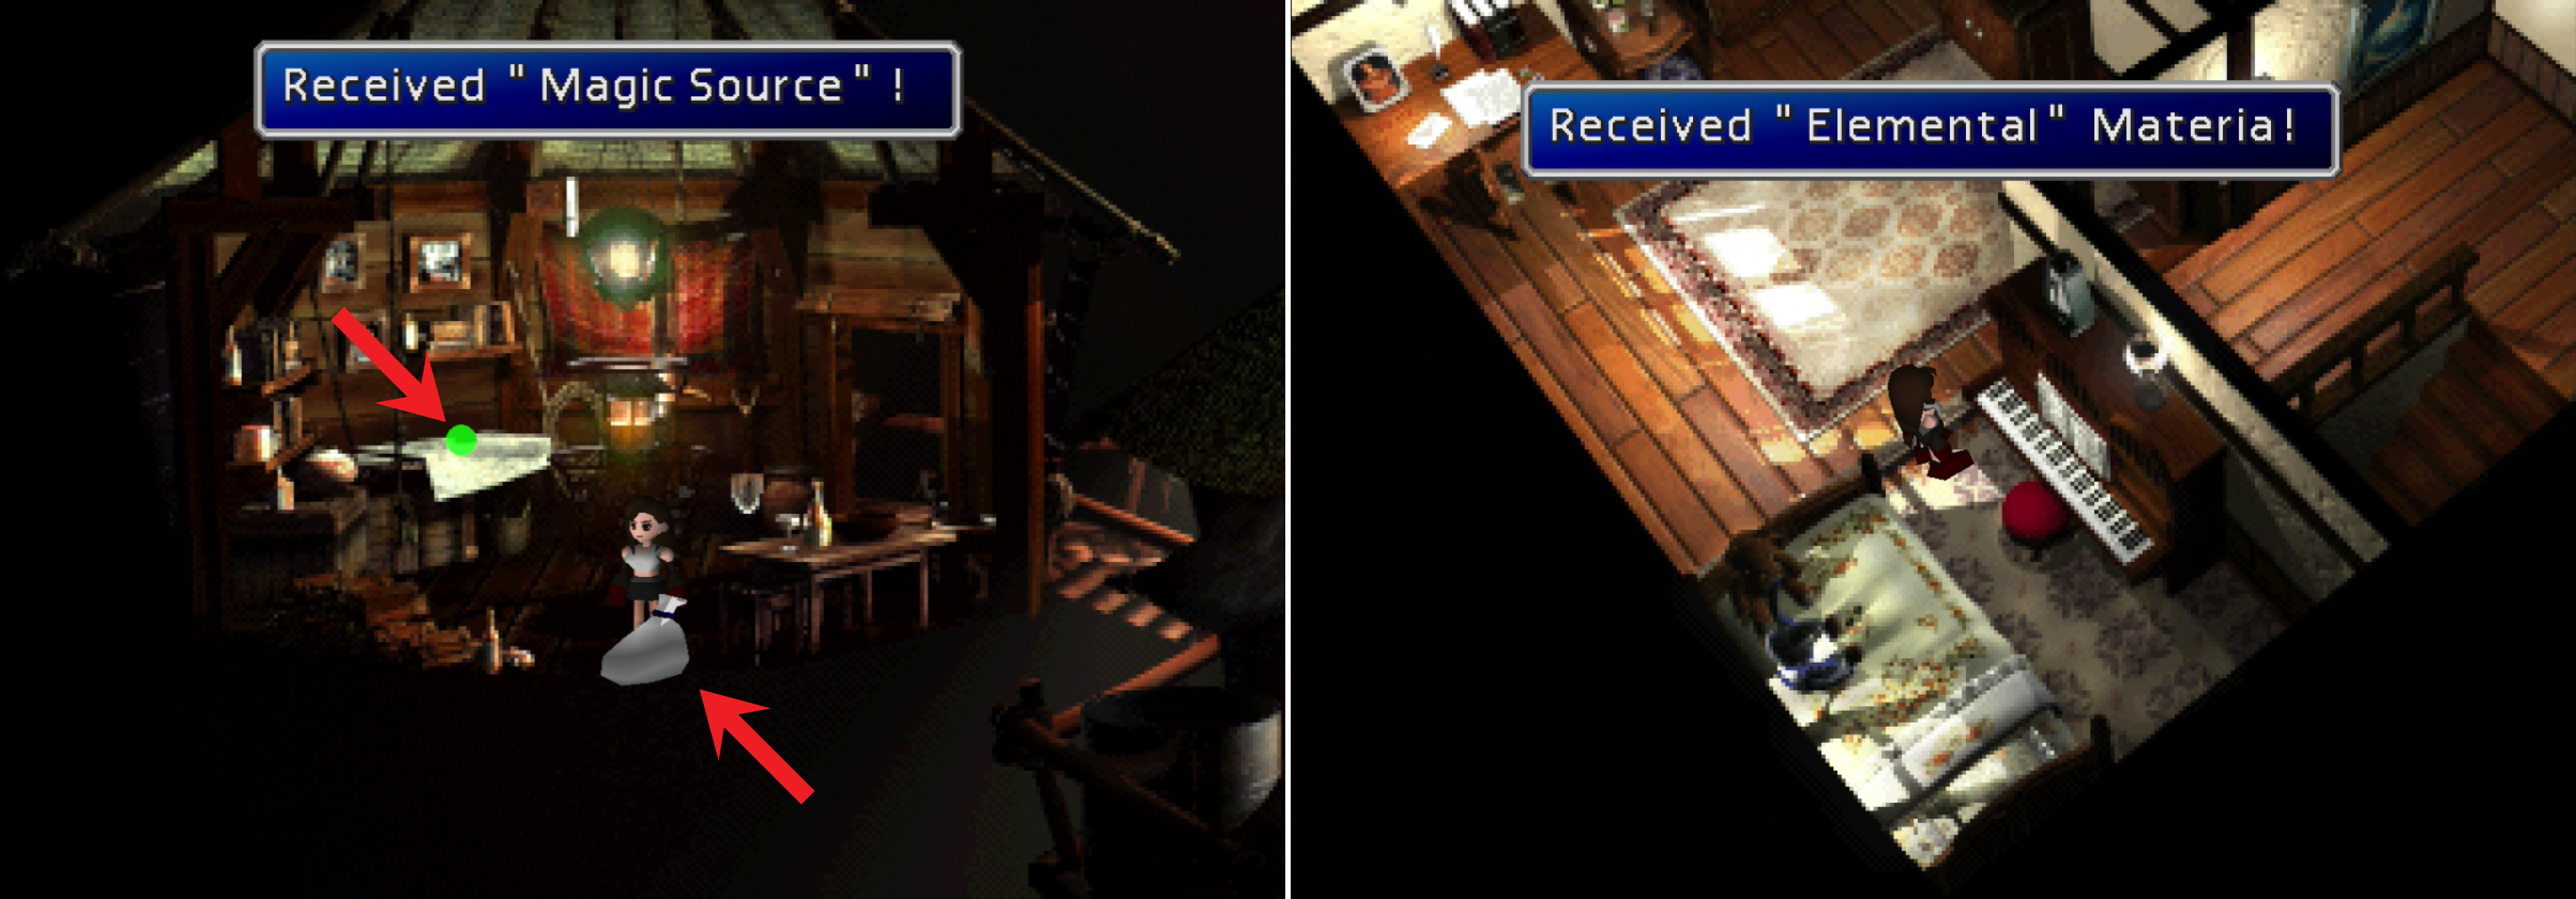 Search the item shop in Cosmo Canyon to score a Magic Source and the Full Cure Materia (left). If you “jammed on” Tifa’s piano earlier in the game, you can search her piano again to recieve a piece of Elemental Materia (right).